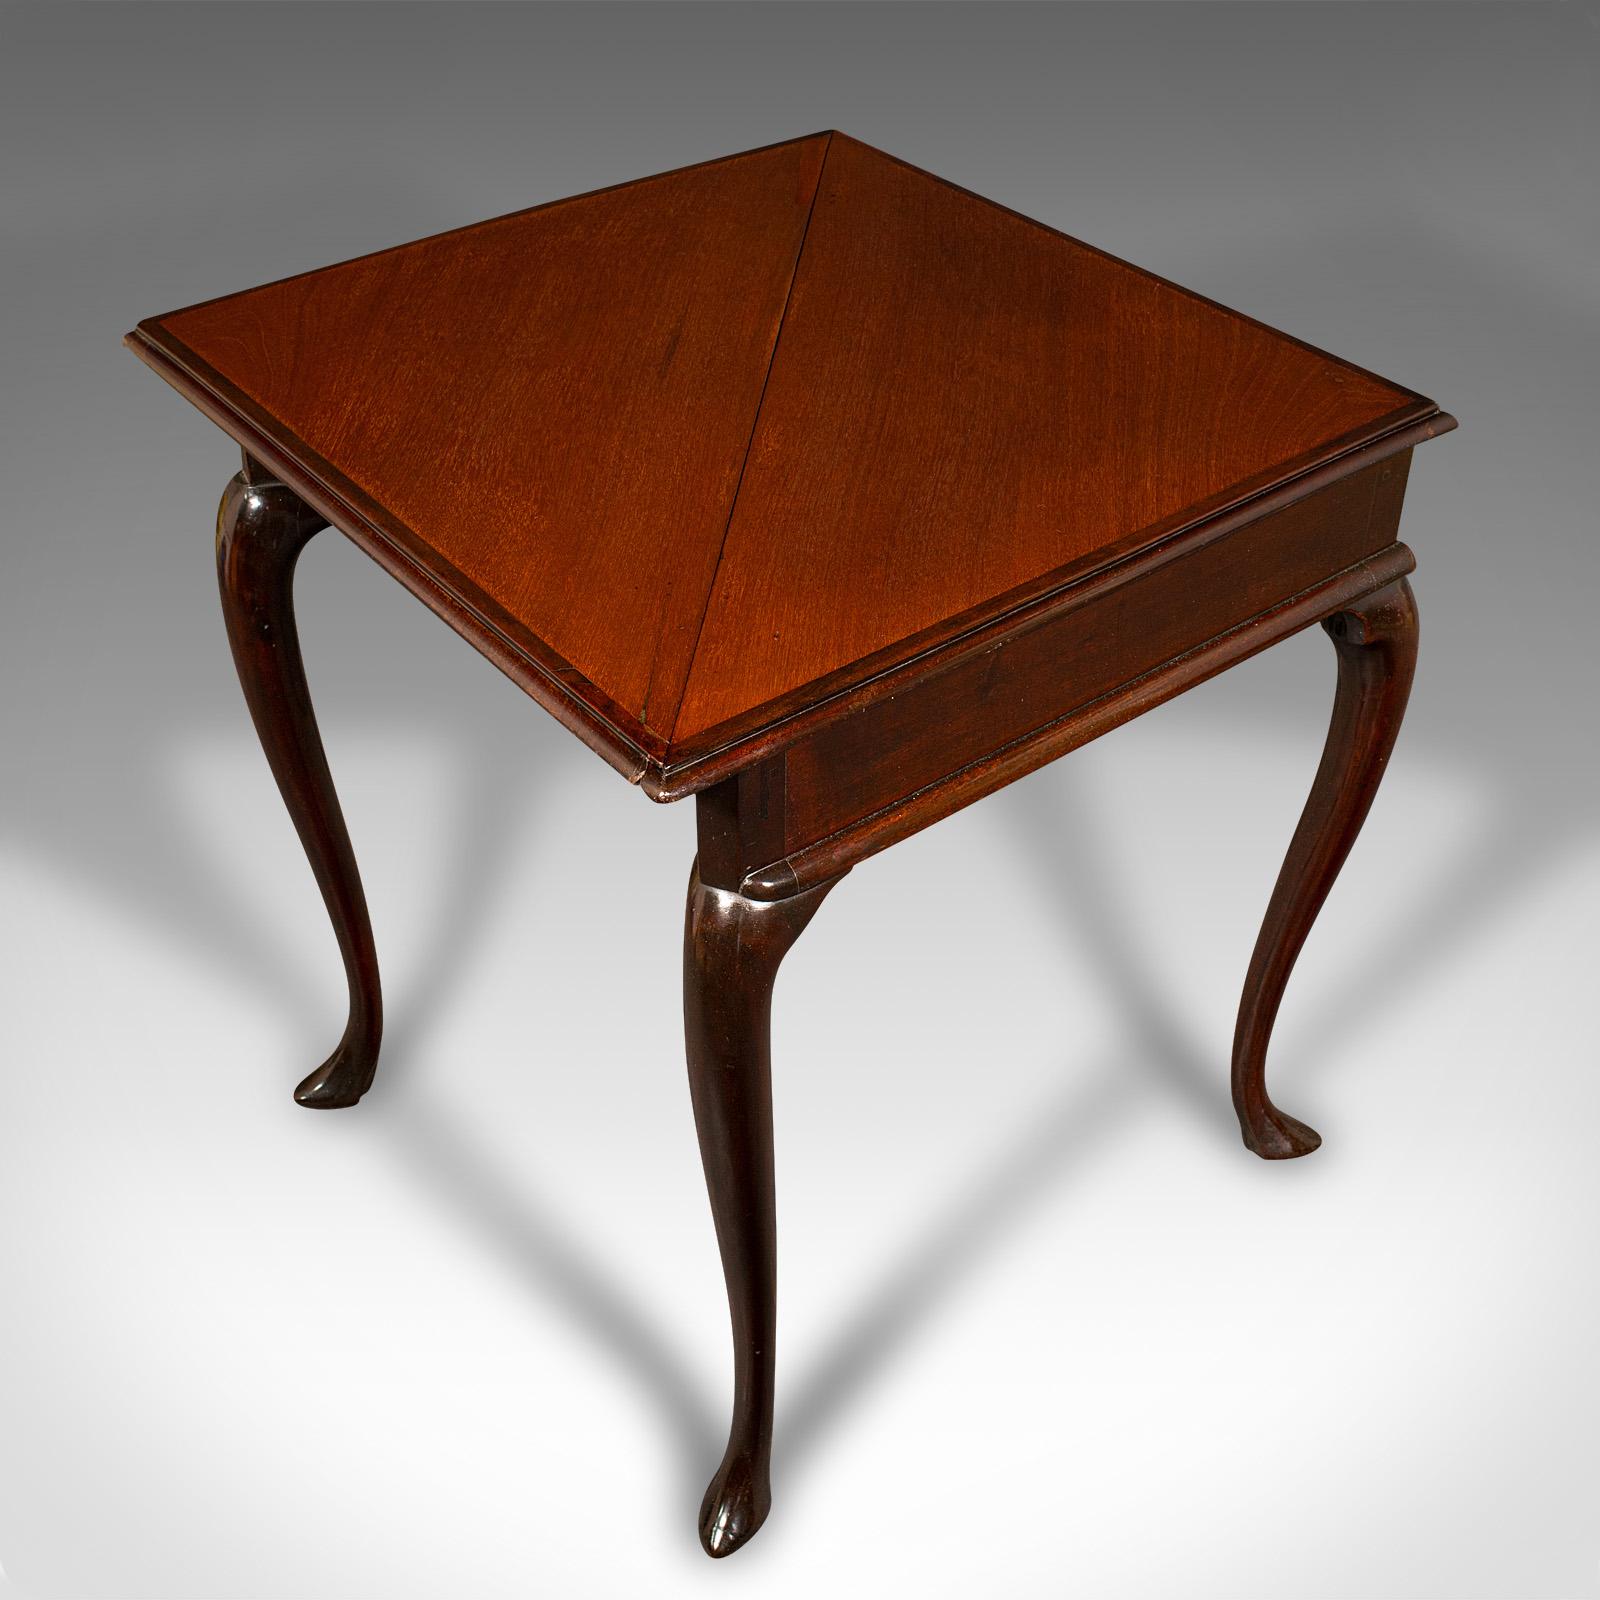 Antique Supper Table, English, Folding, Occasional, Display, Georgian, C.1770 For Sale 2